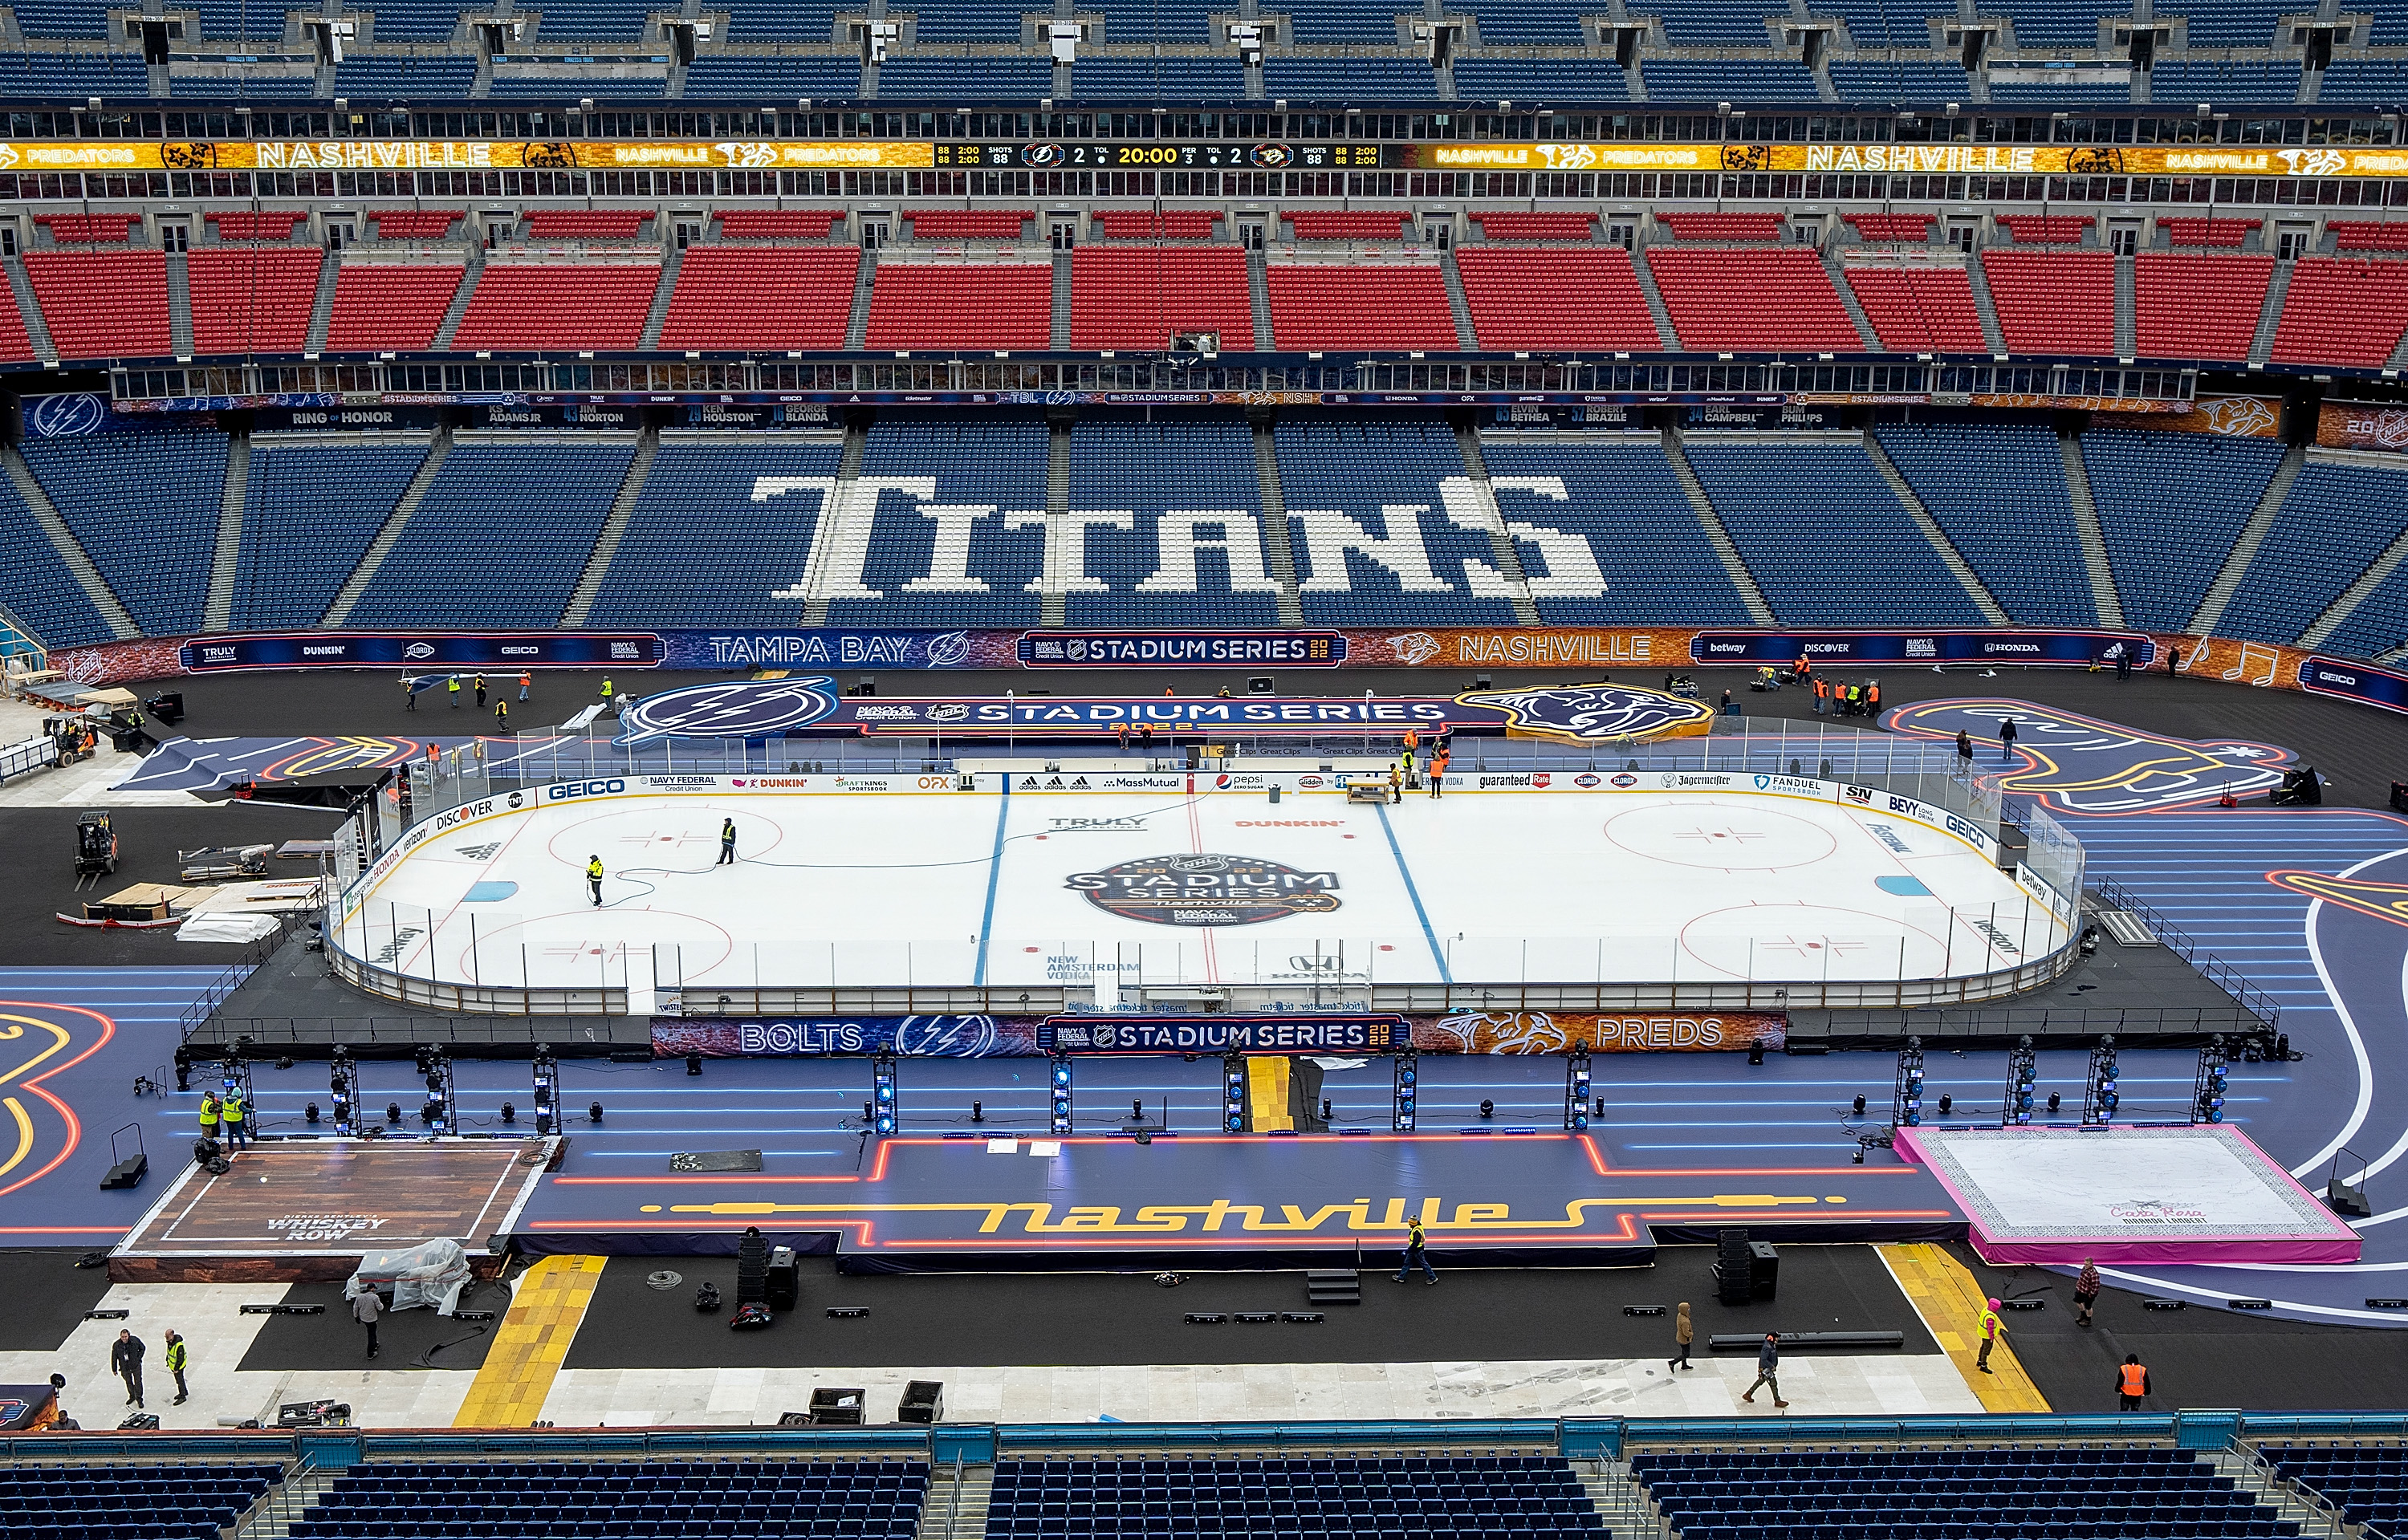 How is the NHL Stadium Series outdoor hockey rink created